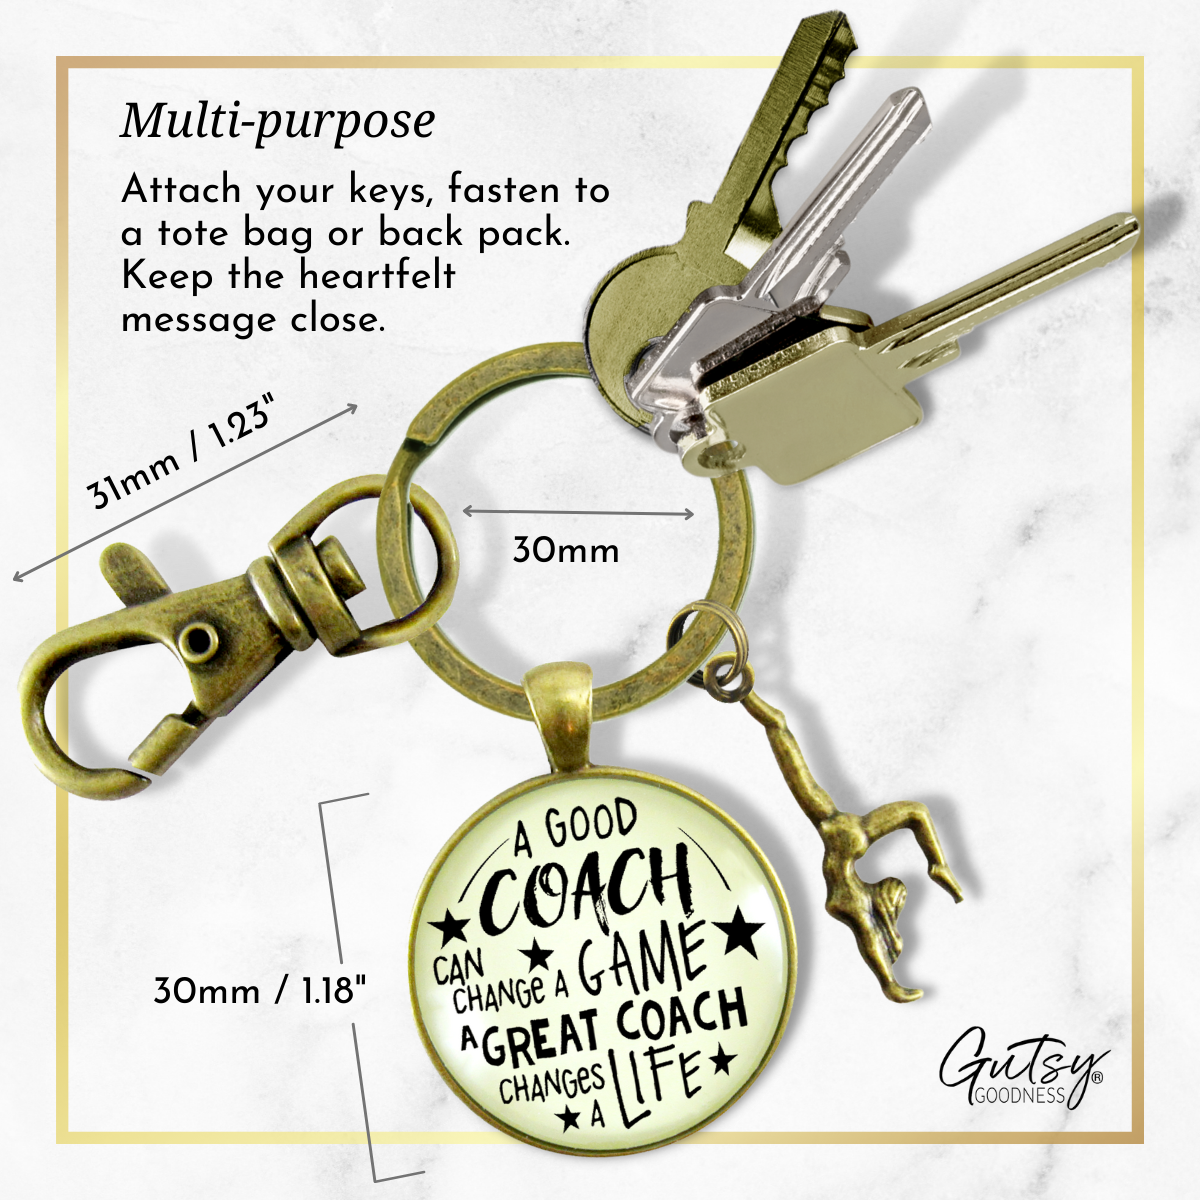 Gymnastics Coaching Sport Keychain Great Coach Changes Life Thank You Gift - Gutsy Goodness Handmade Jewelry;Gymnastics Coaching Sport Keychain Great Coach Changes Life Thank You Gift - Gutsy Goodness Handmade Jewelry Gifts